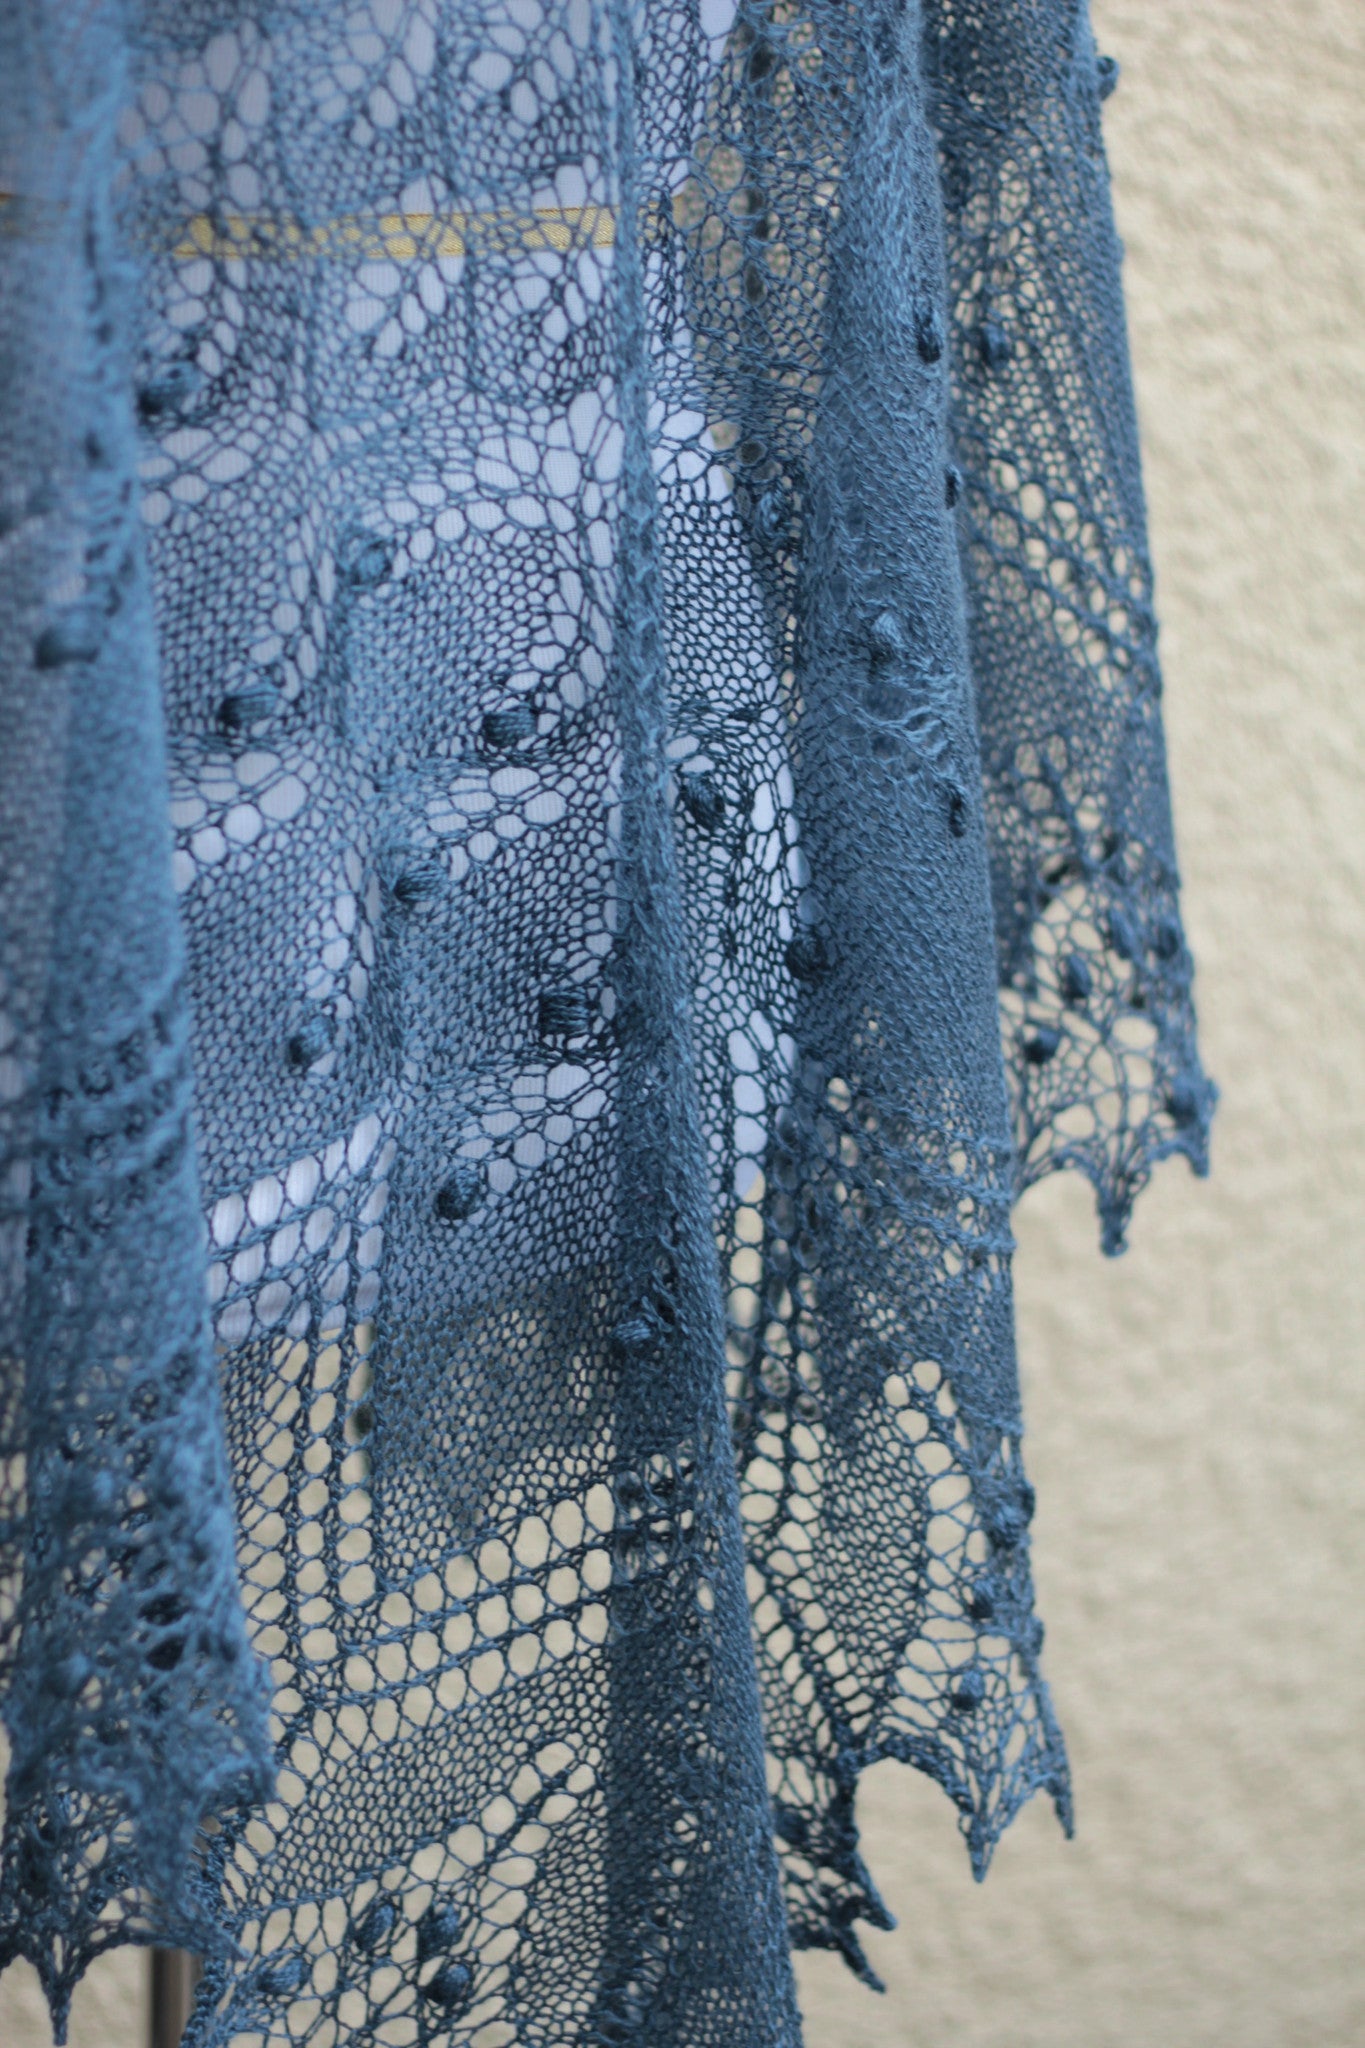 Knit lace shawl in grey blue color with nupps